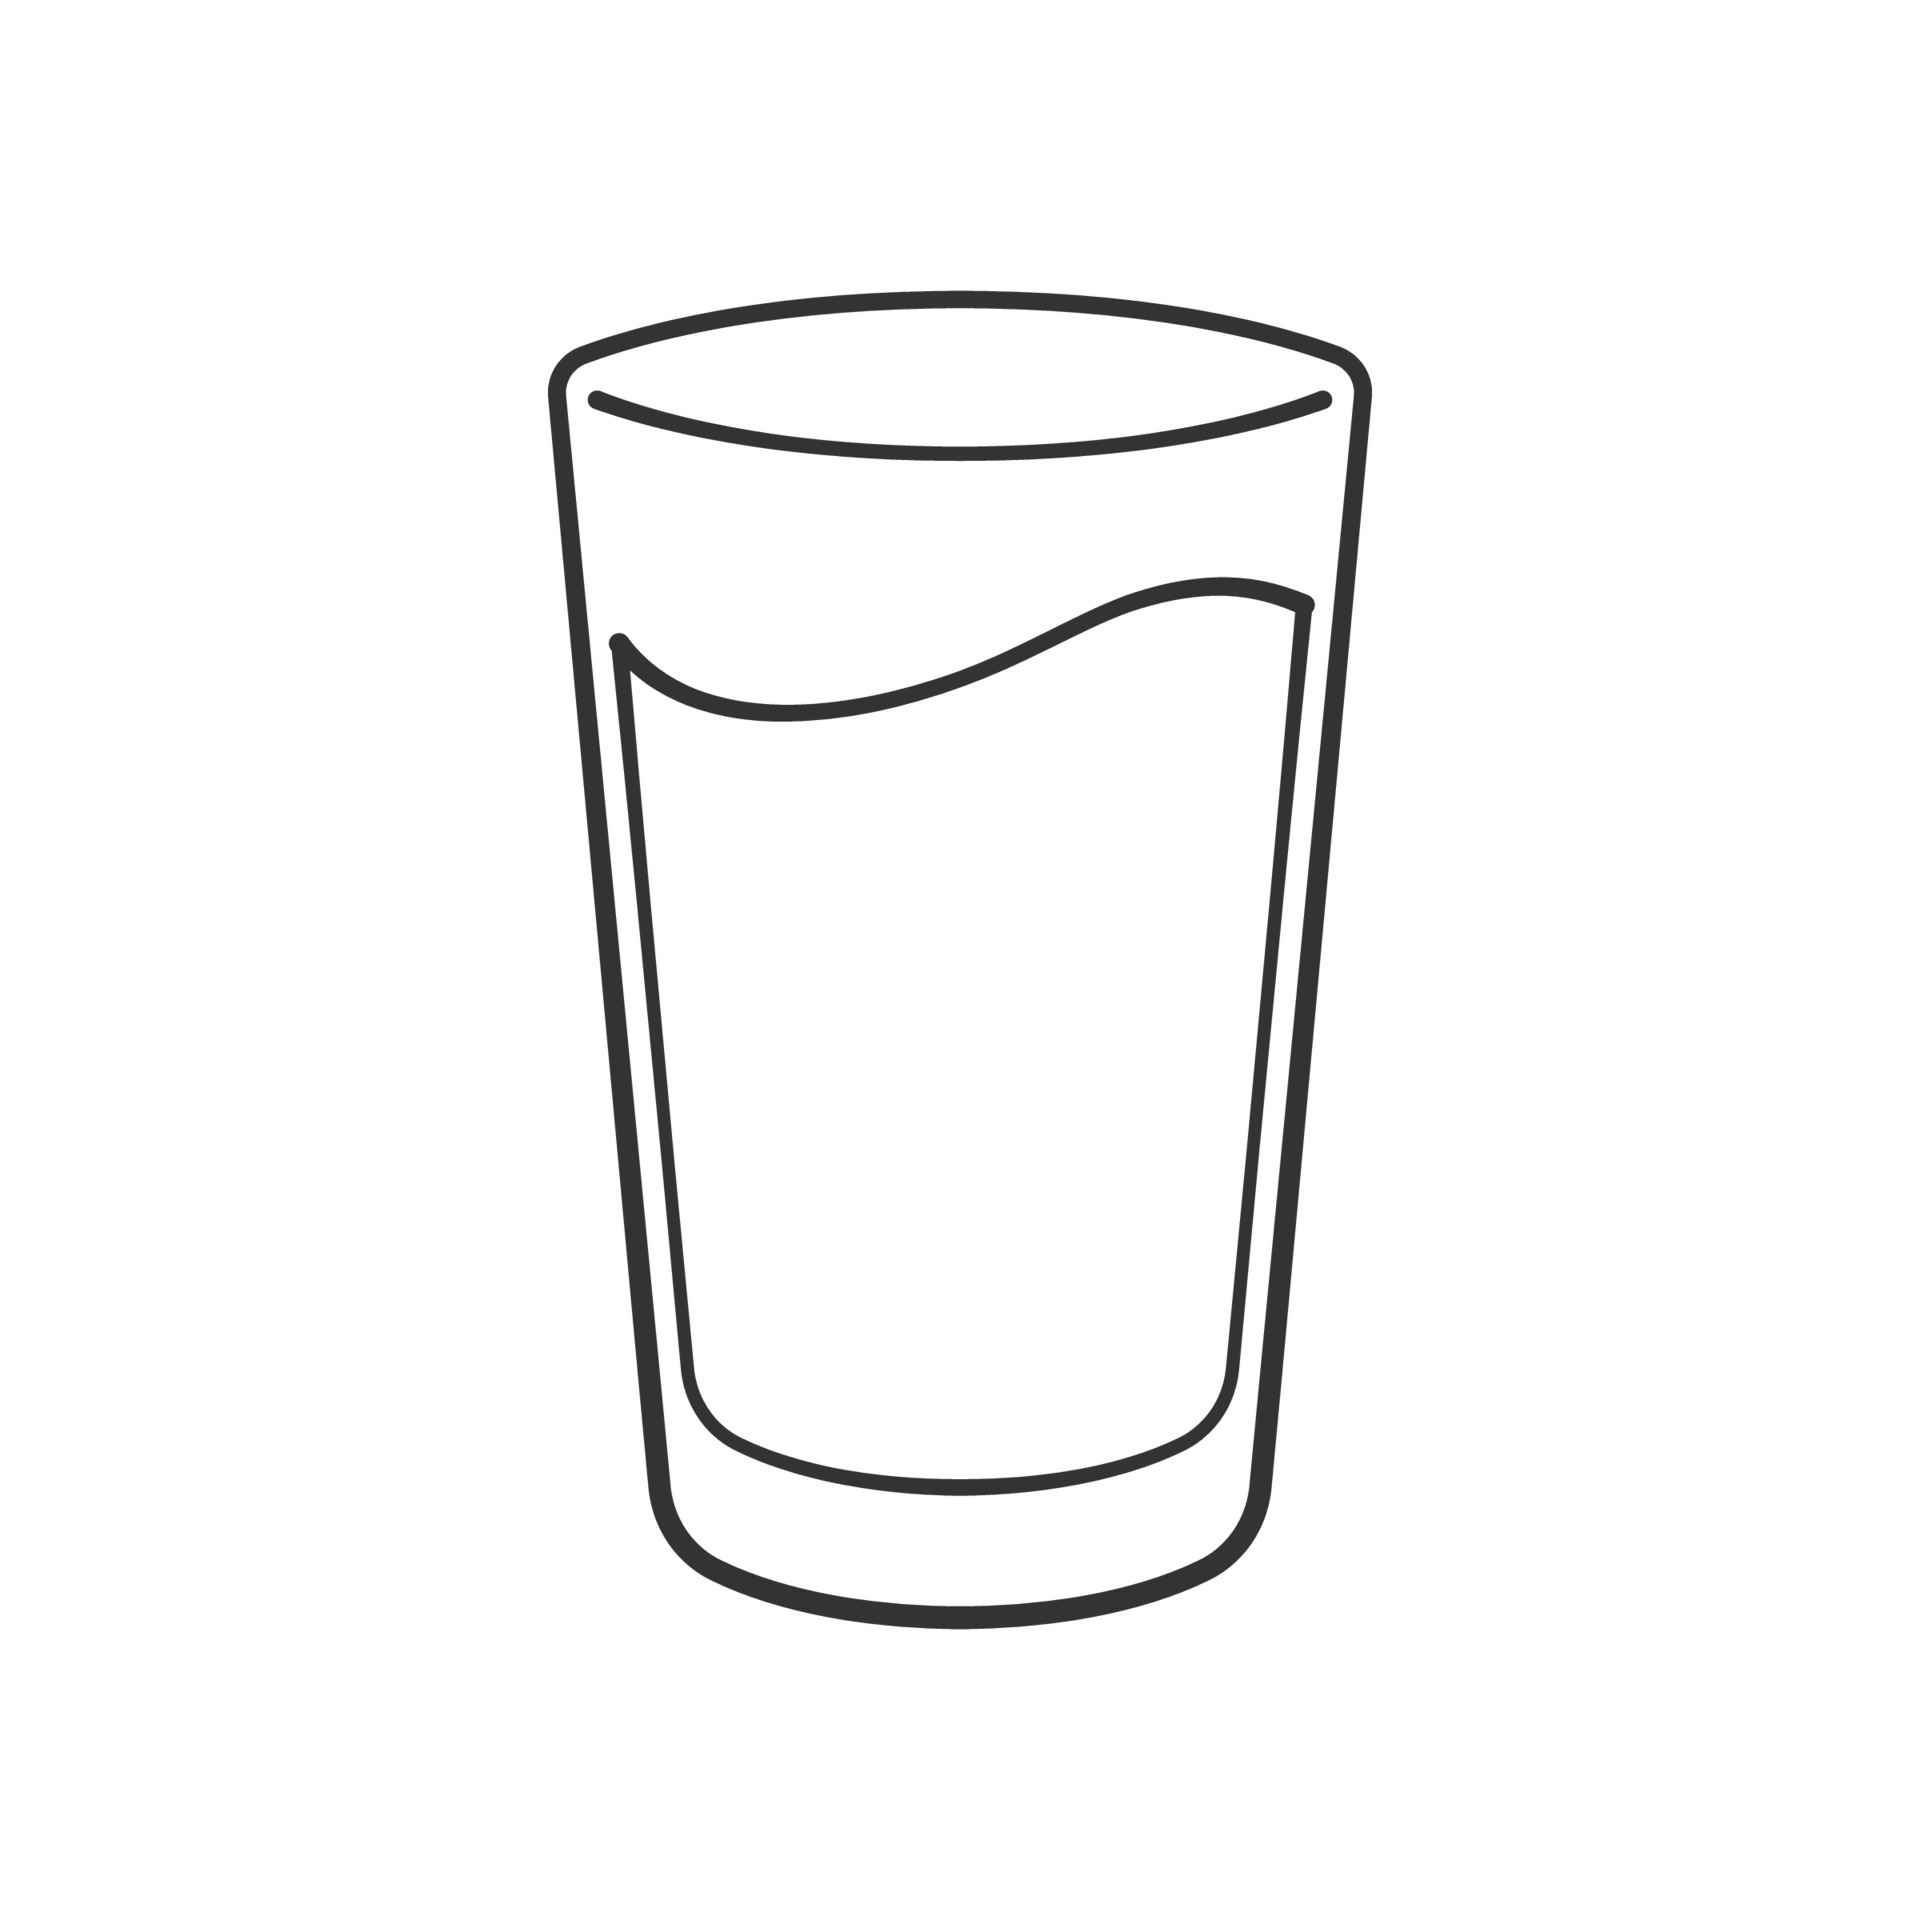 https://static.vecteezy.com/system/resources/previews/016/461/414/original/tall-glass-cup-full-of-water-or-liquid-outline-clipart-element-simple-flat-illustration-vector.jpg